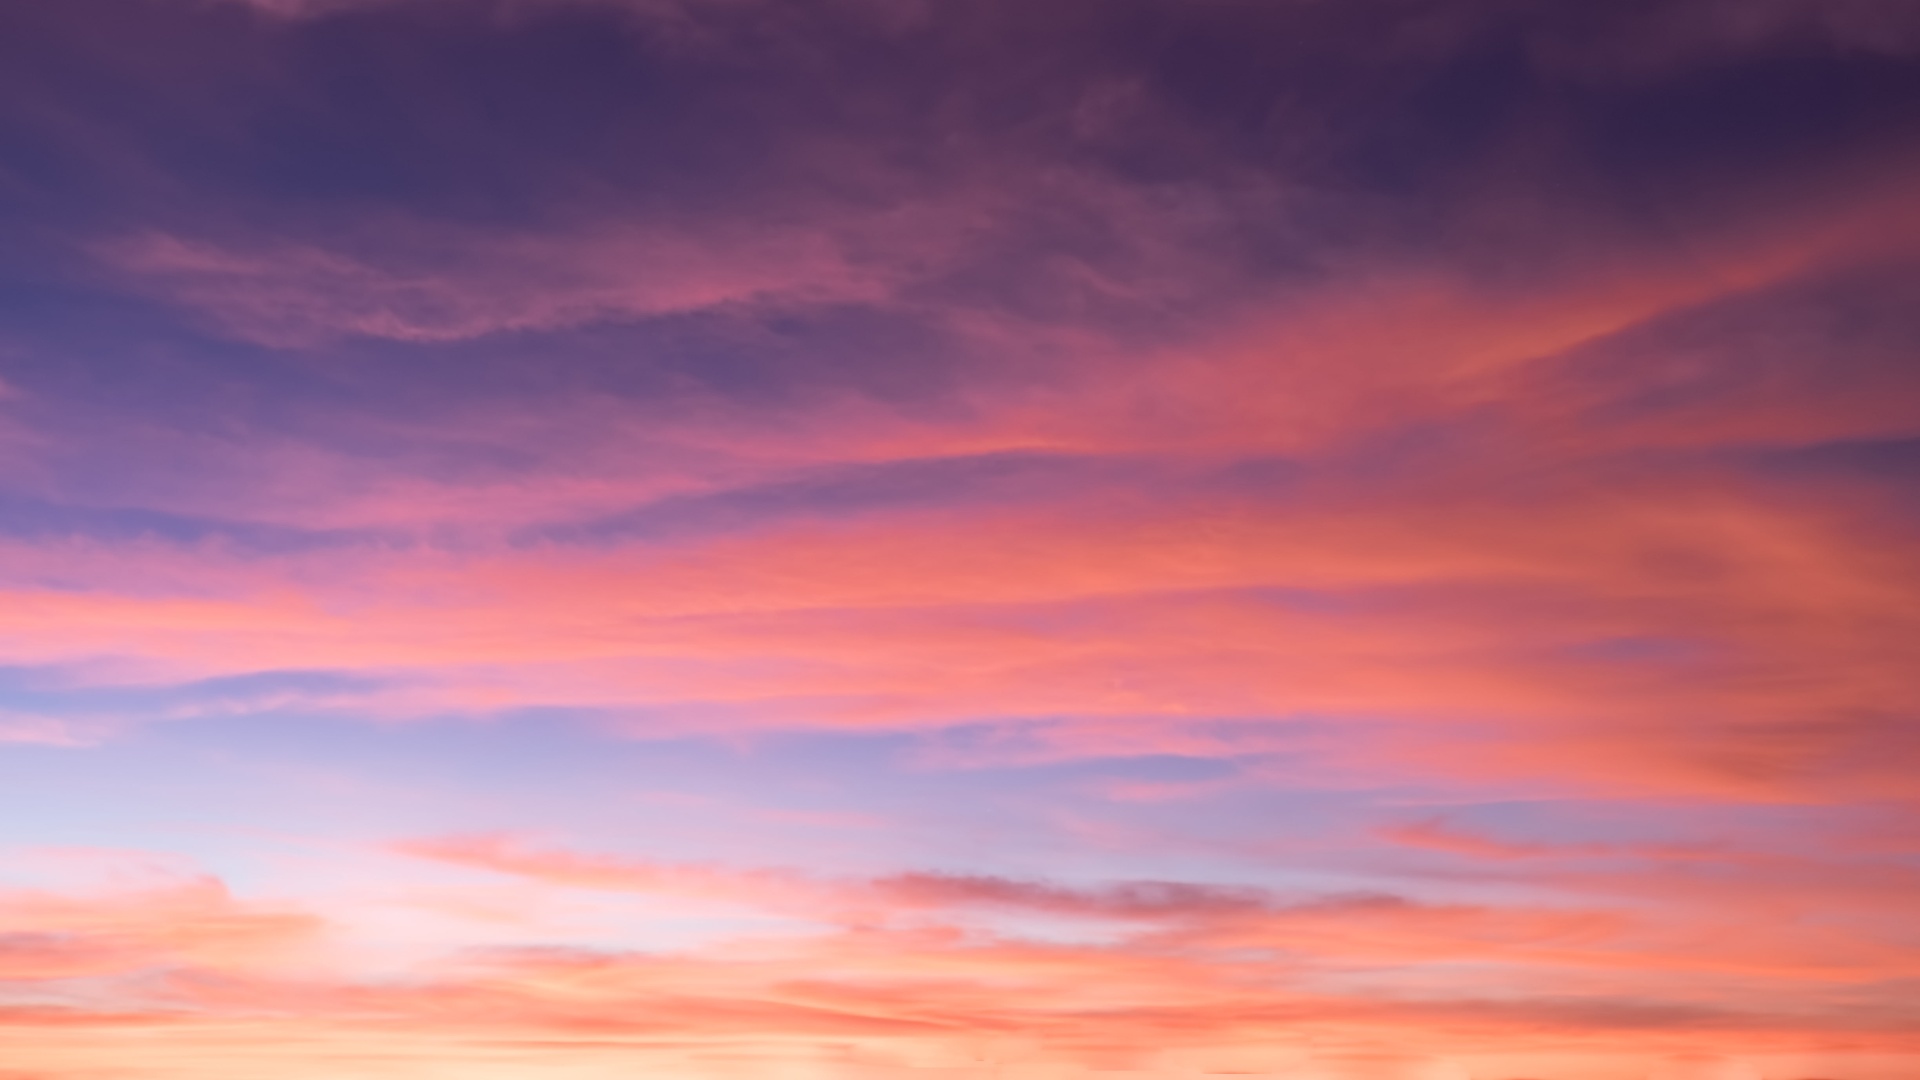 Aesthetic Clouds Wallpaper Aesthetic Clouds Wallpaper Download